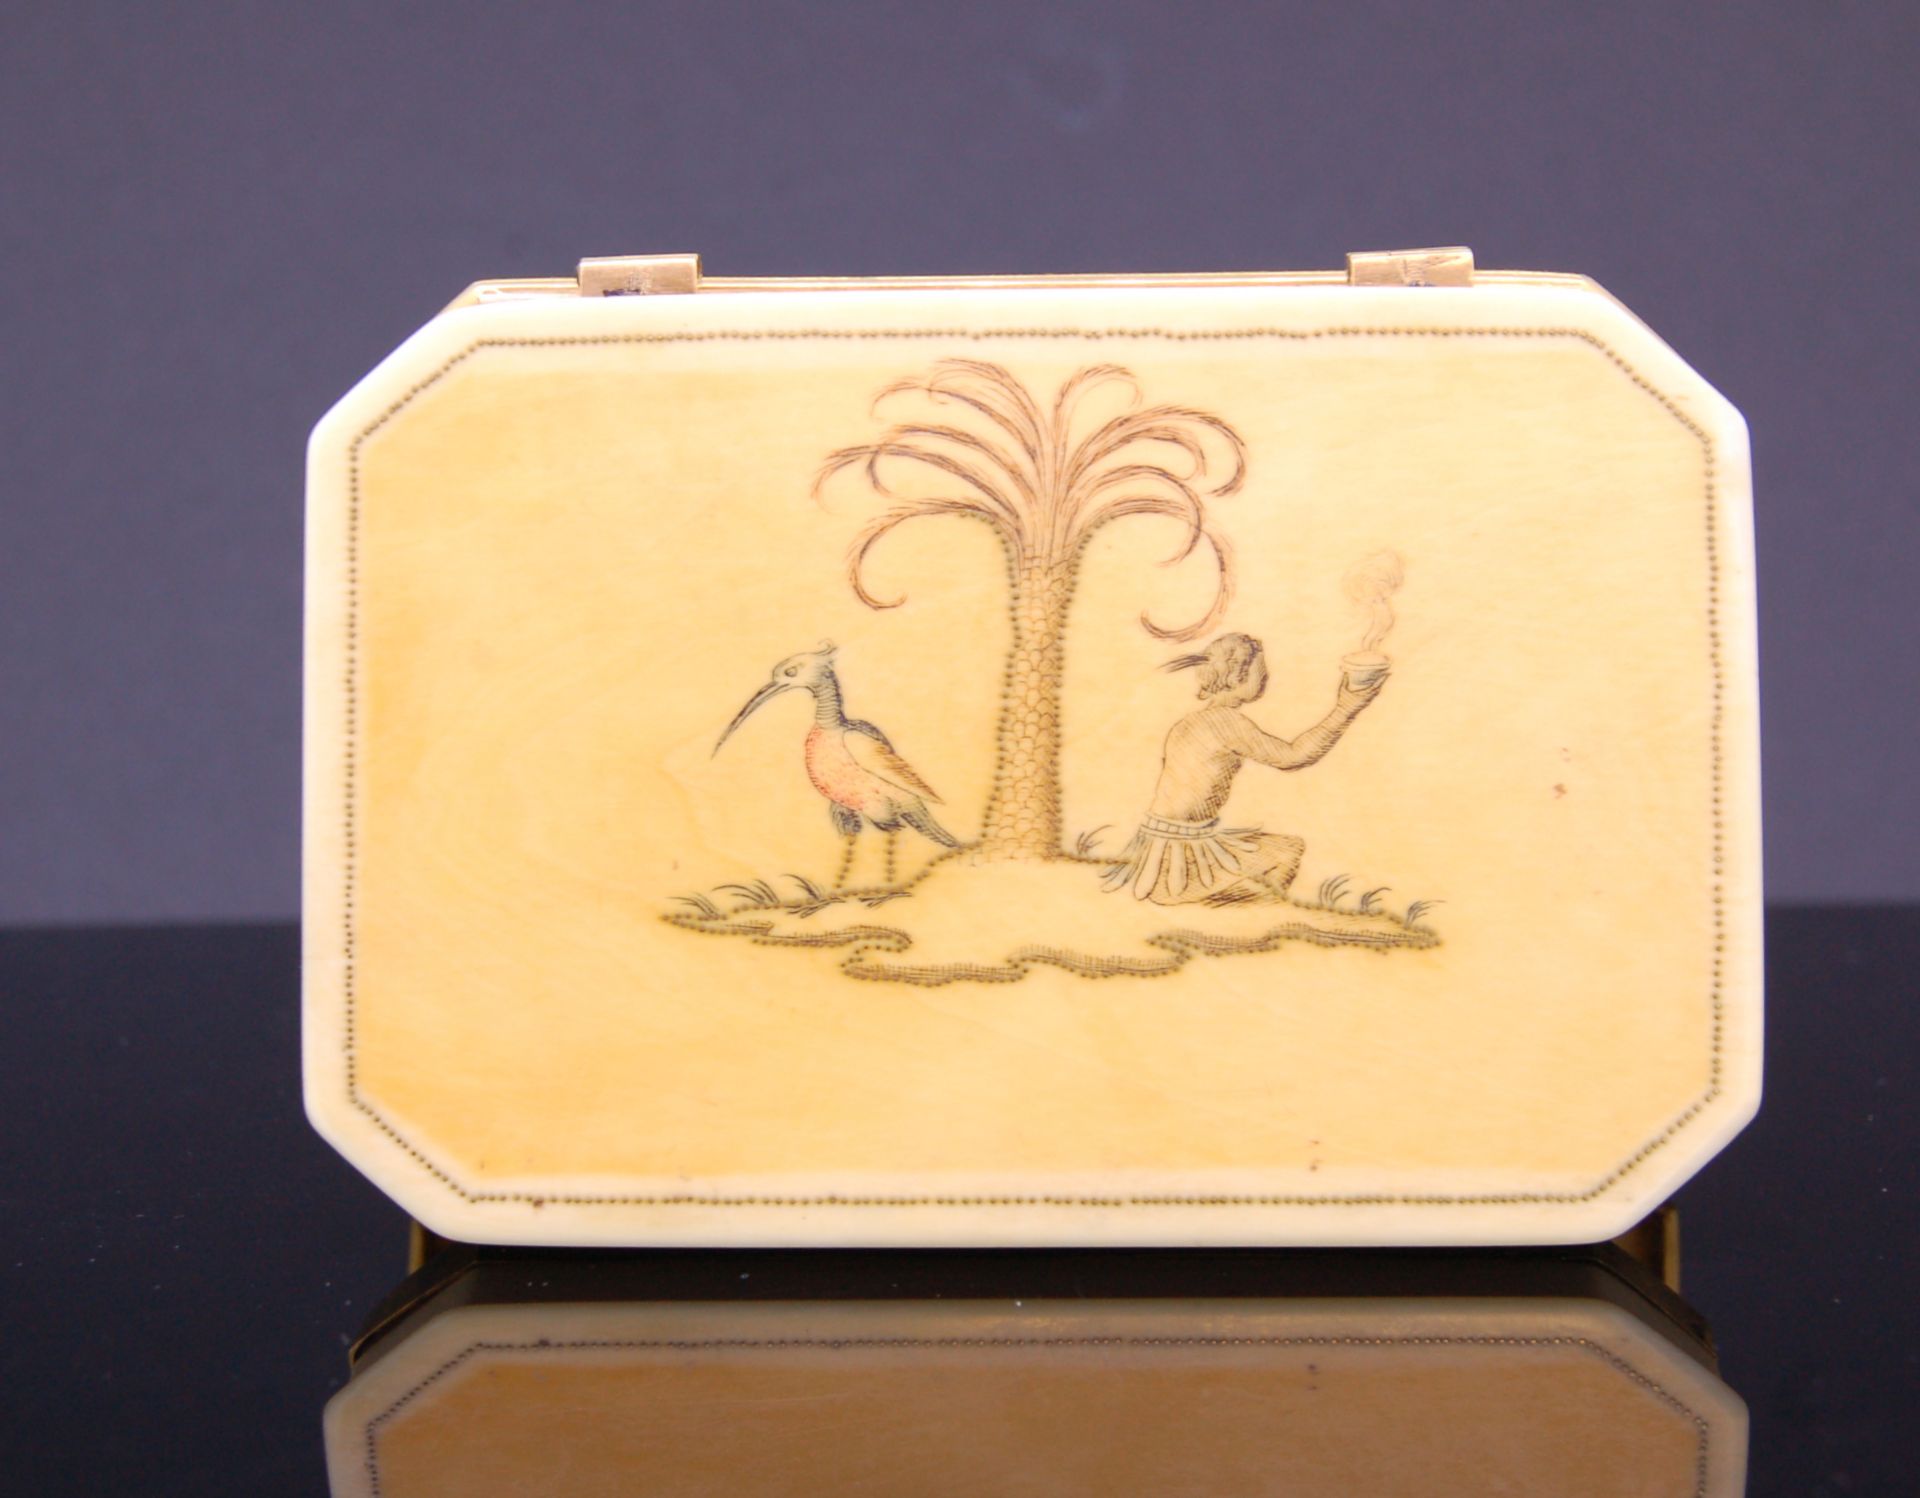 18th CENTURY RECTANGULAR SNUFFBOX WITH GOLD MOUNT - Image 3 of 4